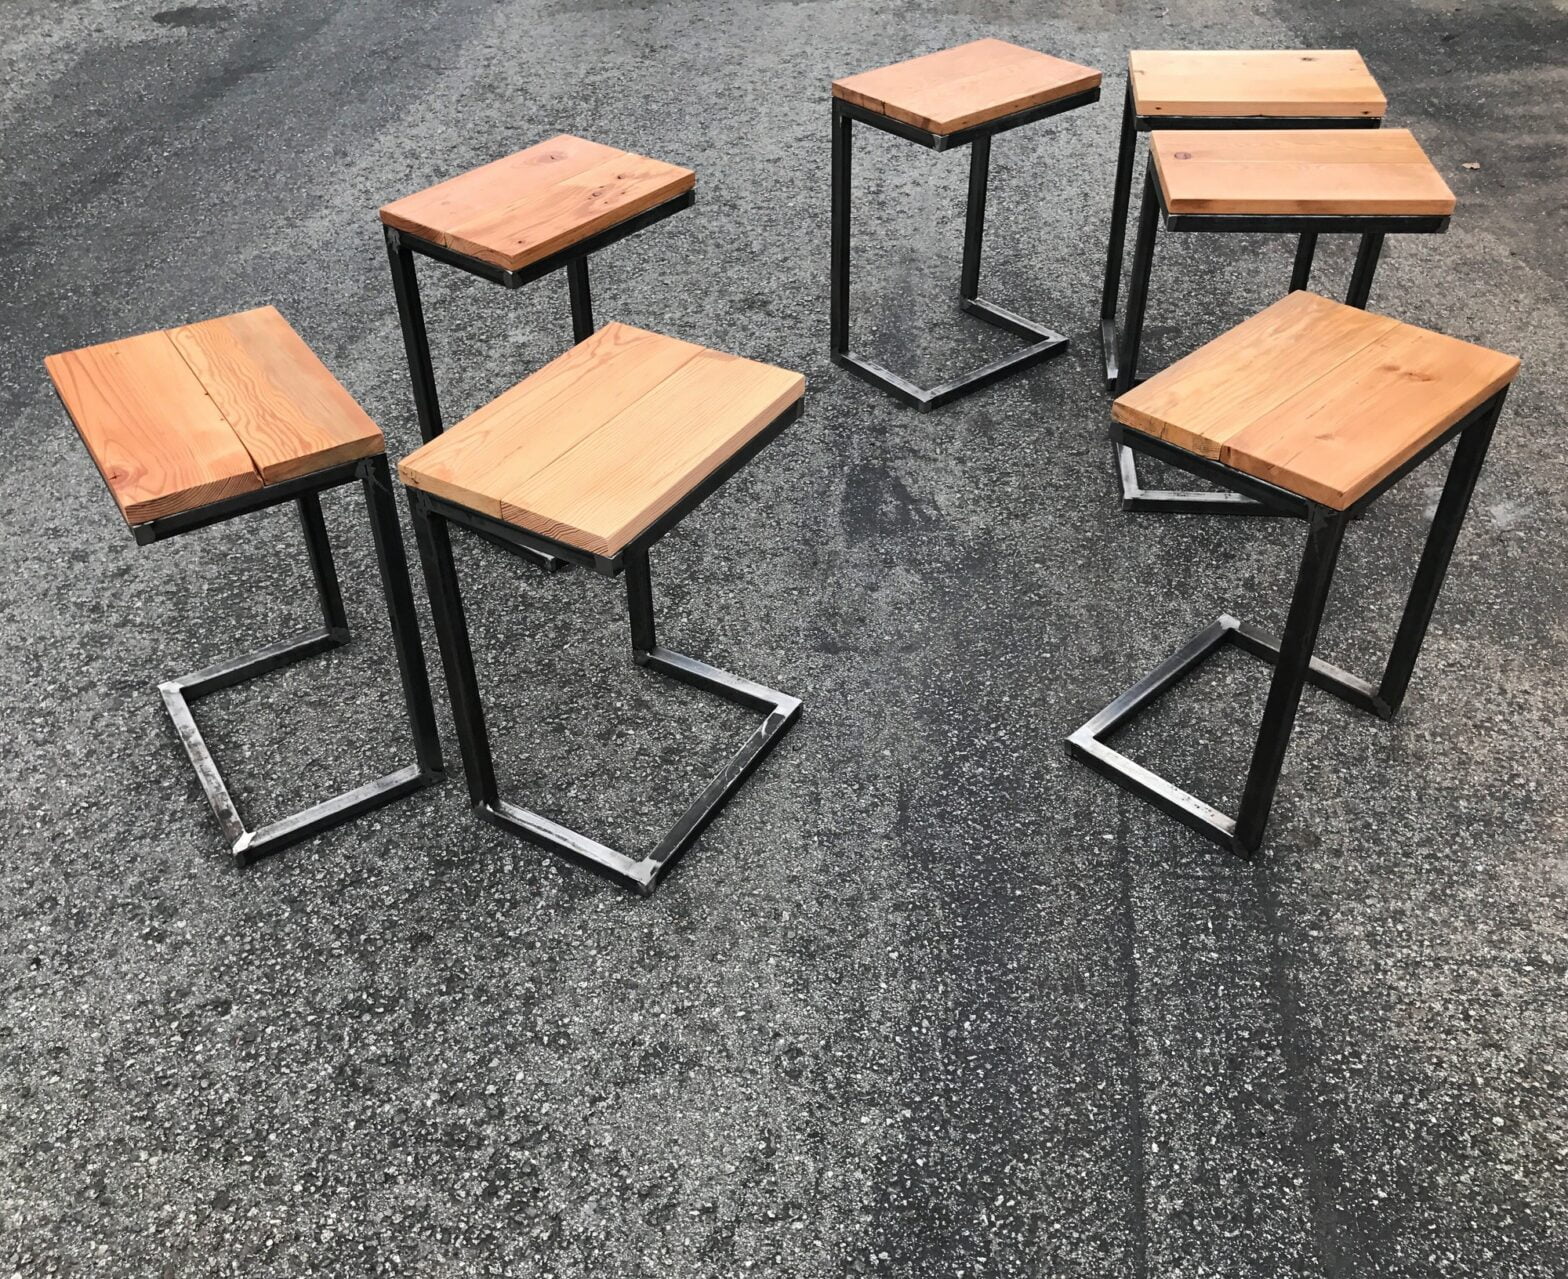 Group of bar stools chairs tables wood metal industrial furniture decor design